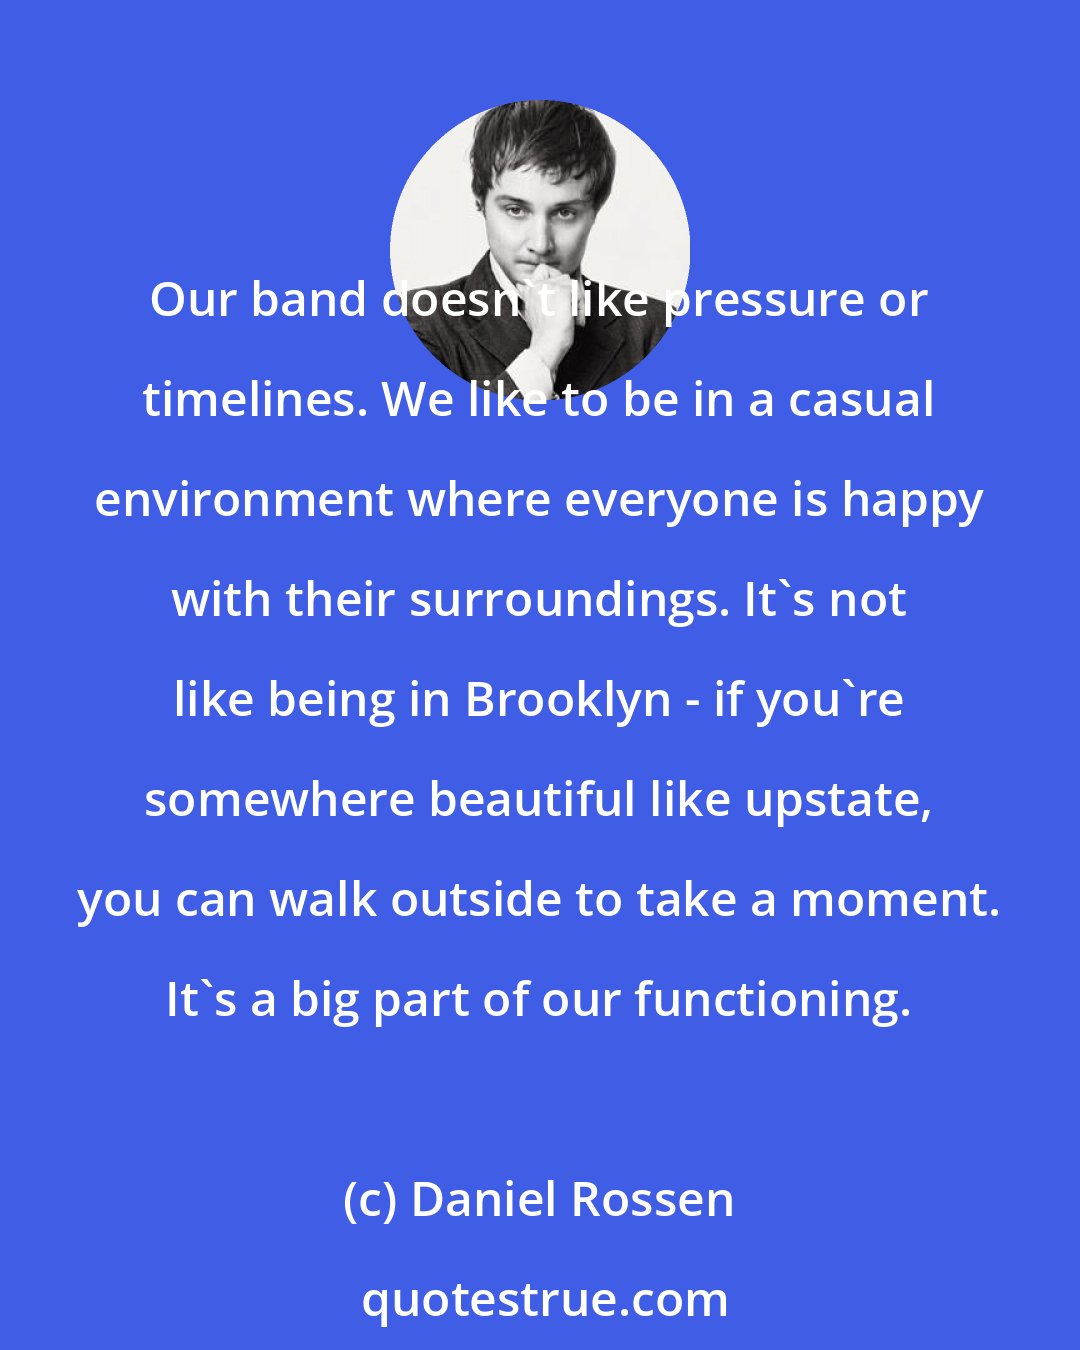 Daniel Rossen: Our band doesn't like pressure or timelines. We like to be in a casual environment where everyone is happy with their surroundings. It's not like being in Brooklyn - if you're somewhere beautiful like upstate, you can walk outside to take a moment. It's a big part of our functioning.